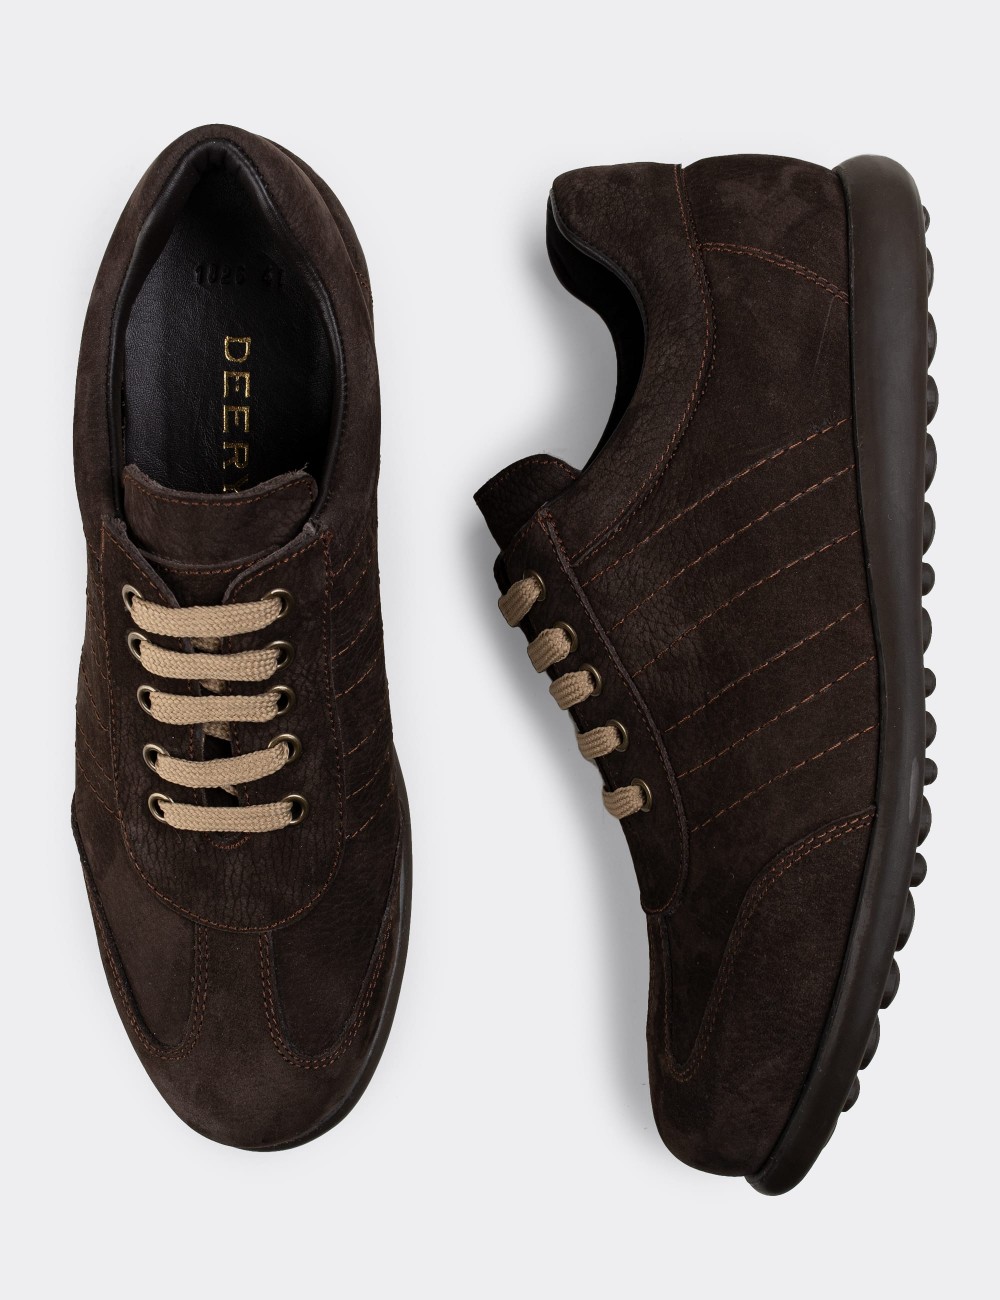 Brown Nubuck Leather Lace-up Shoes - 01826MKHVC03